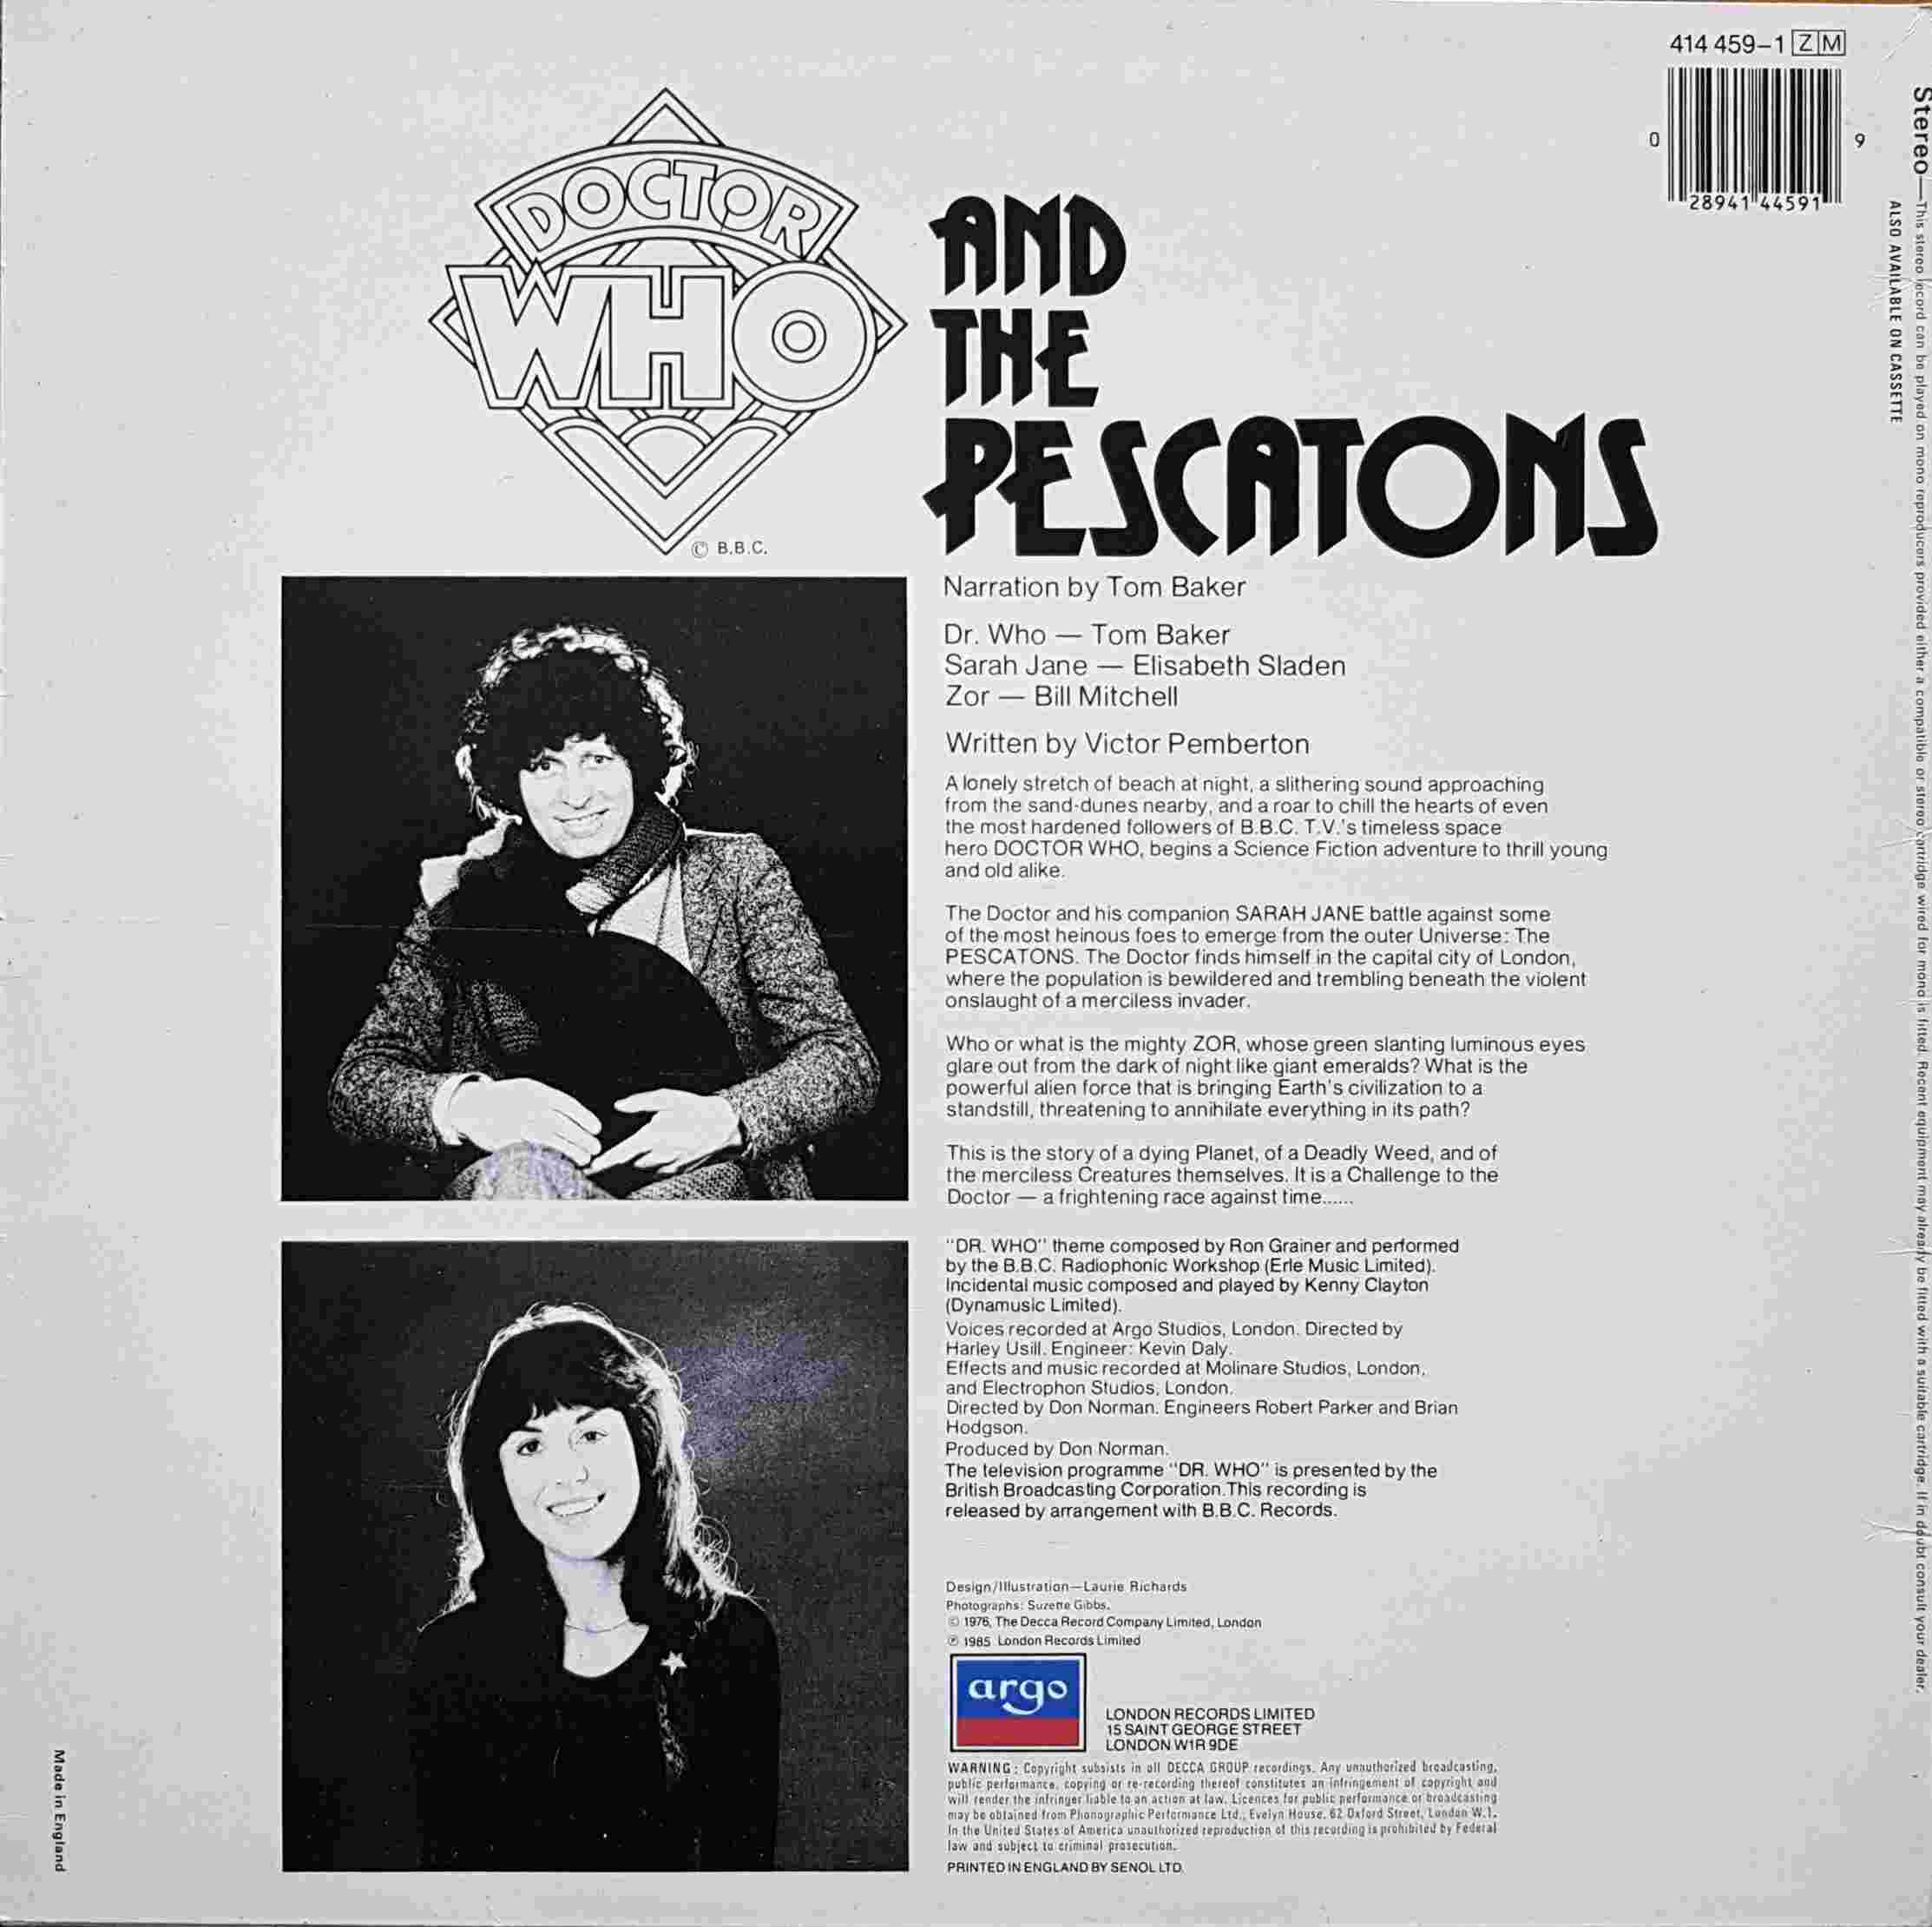 Picture of 414459 1 Doctor who and the Prescatons by artist Victor Pembleton from the BBC records and Tapes library